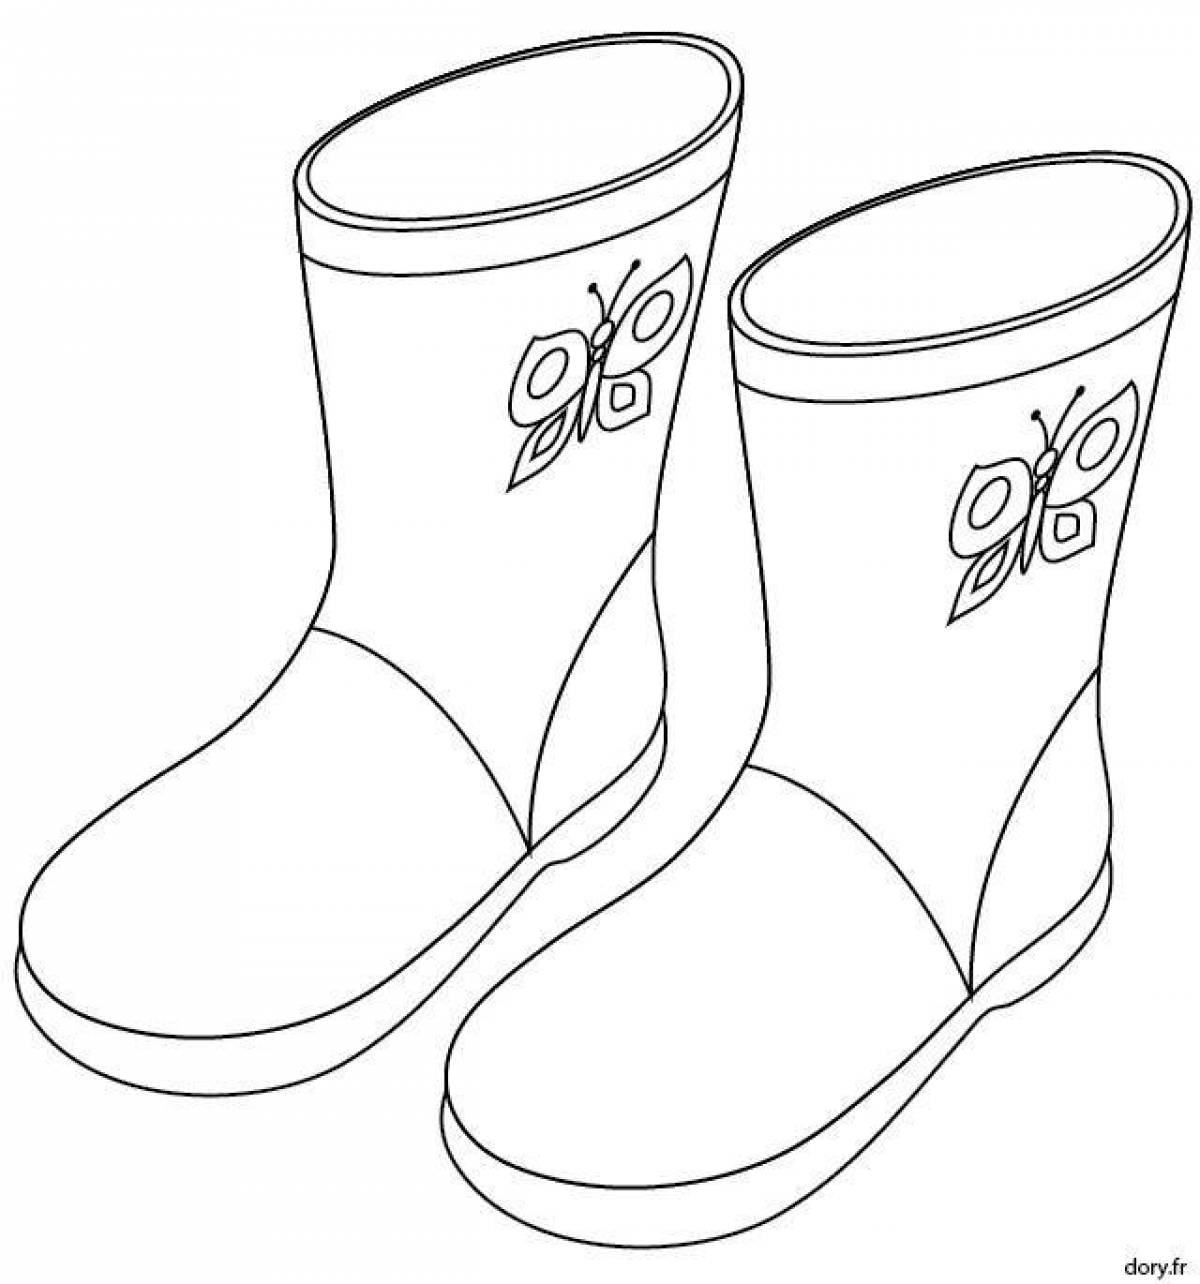 Fairy shoes coloring page